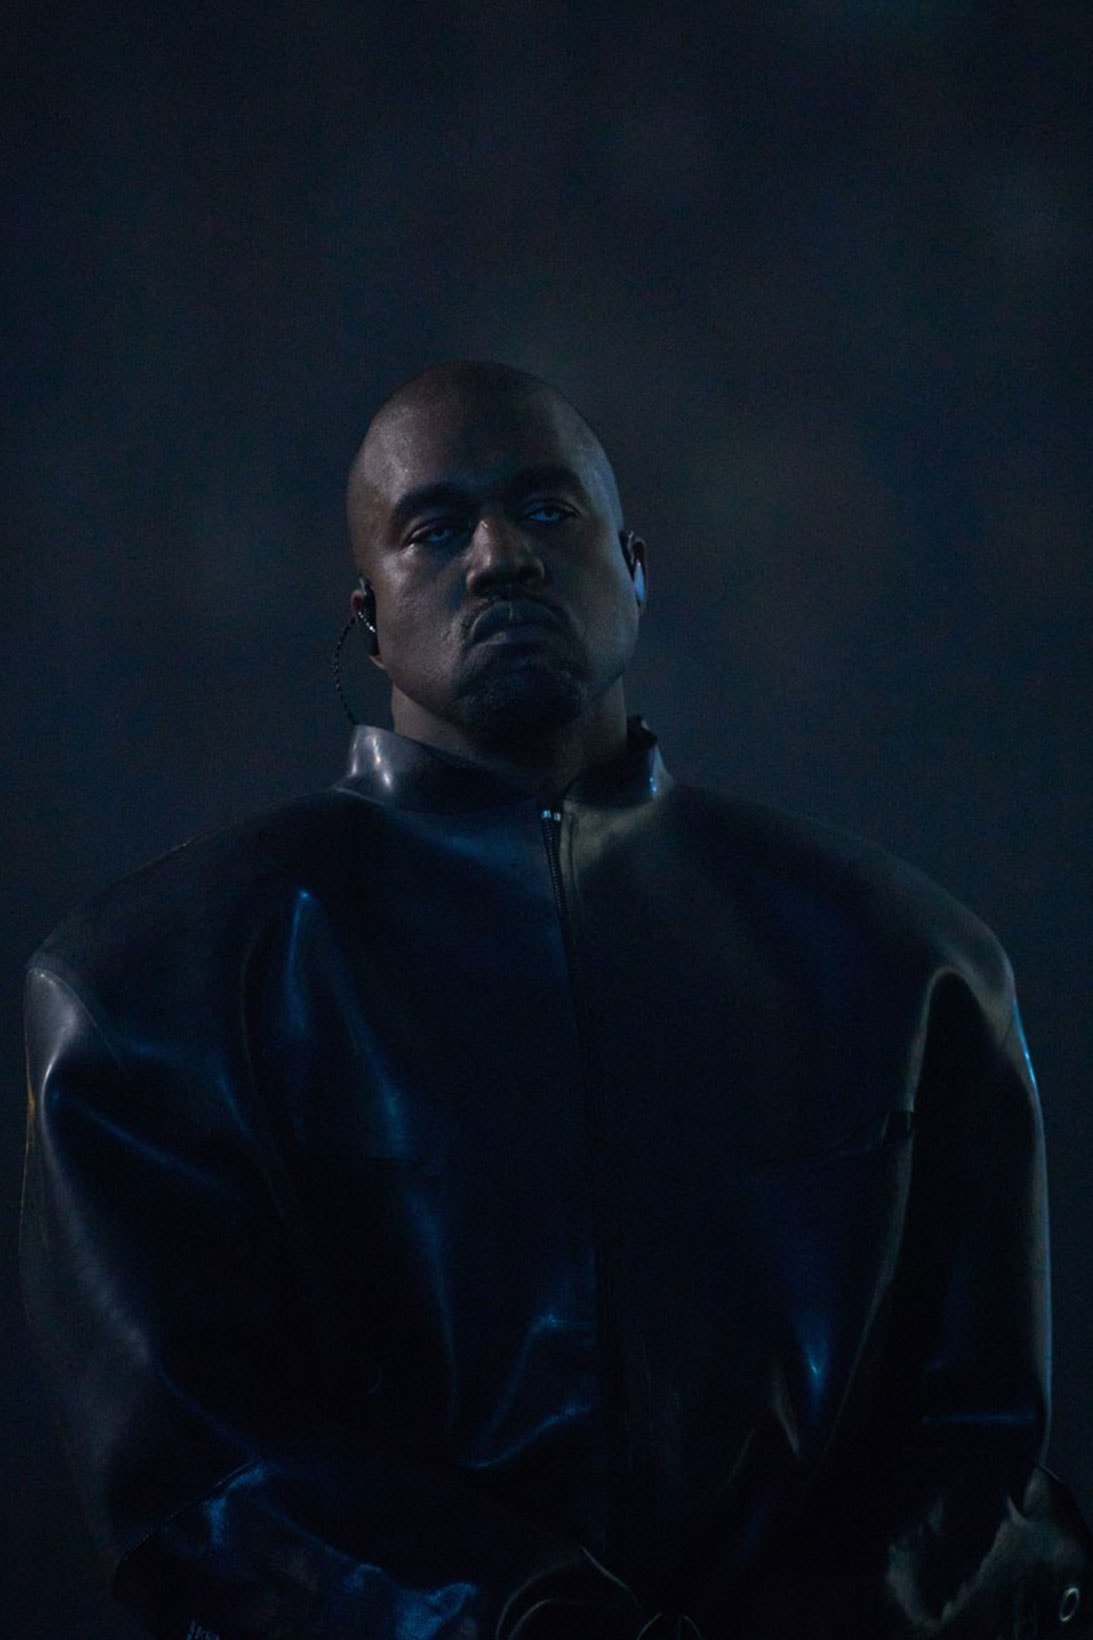 Kanye West DONDA 2 Throws His Mic Why Reason Audio Issues Twitter Reactions Info